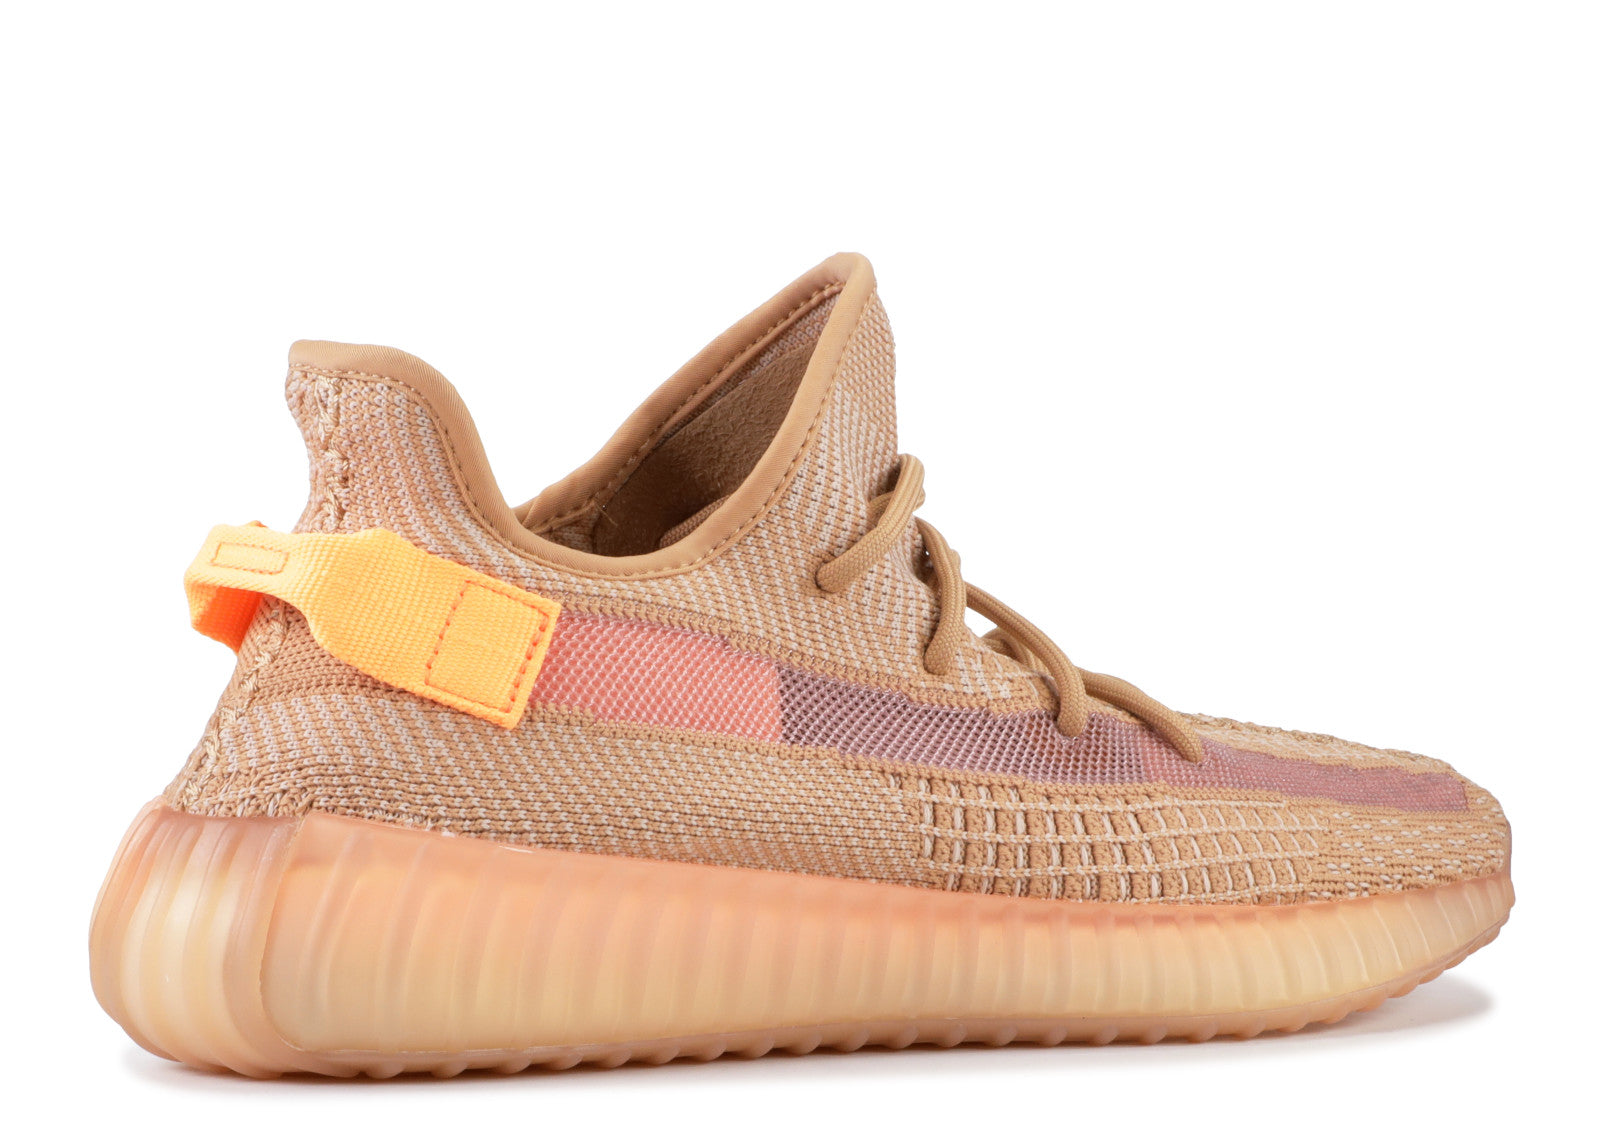 yeezy boost 350 v2 clay 6.5